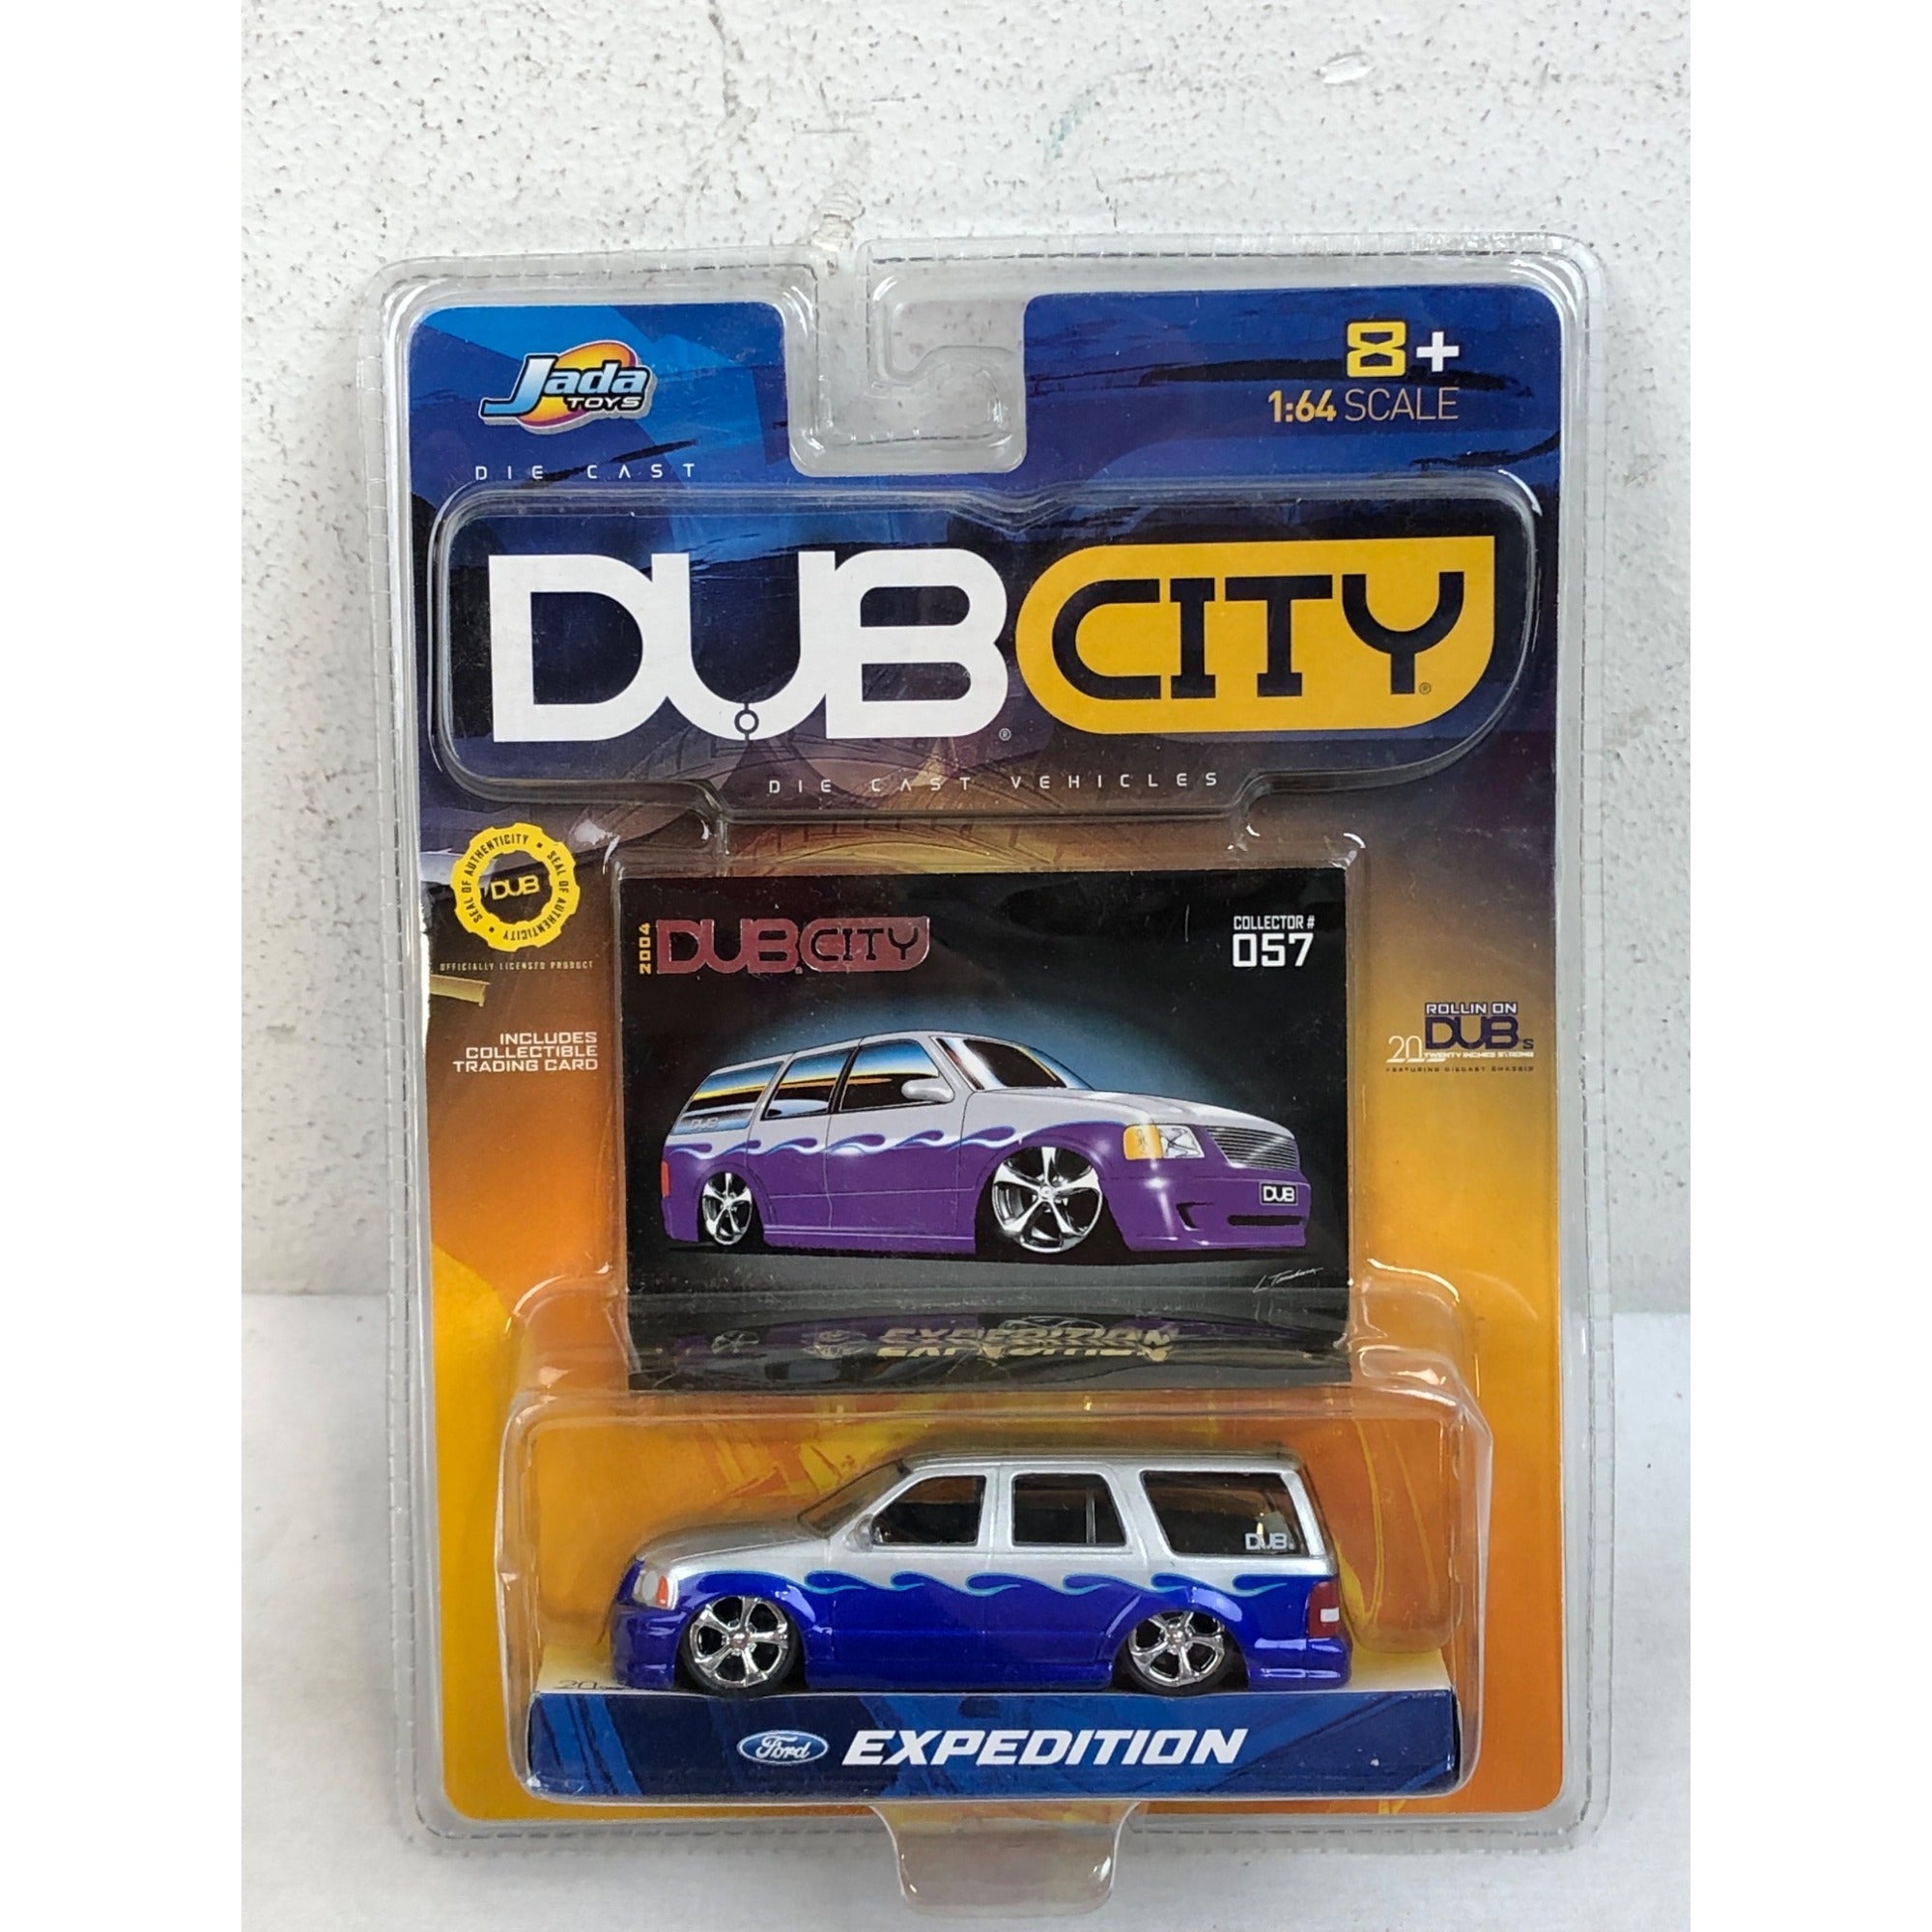 Jada Toys Dub City 1:64 Die Cast 2004 - Ford Expedition 057